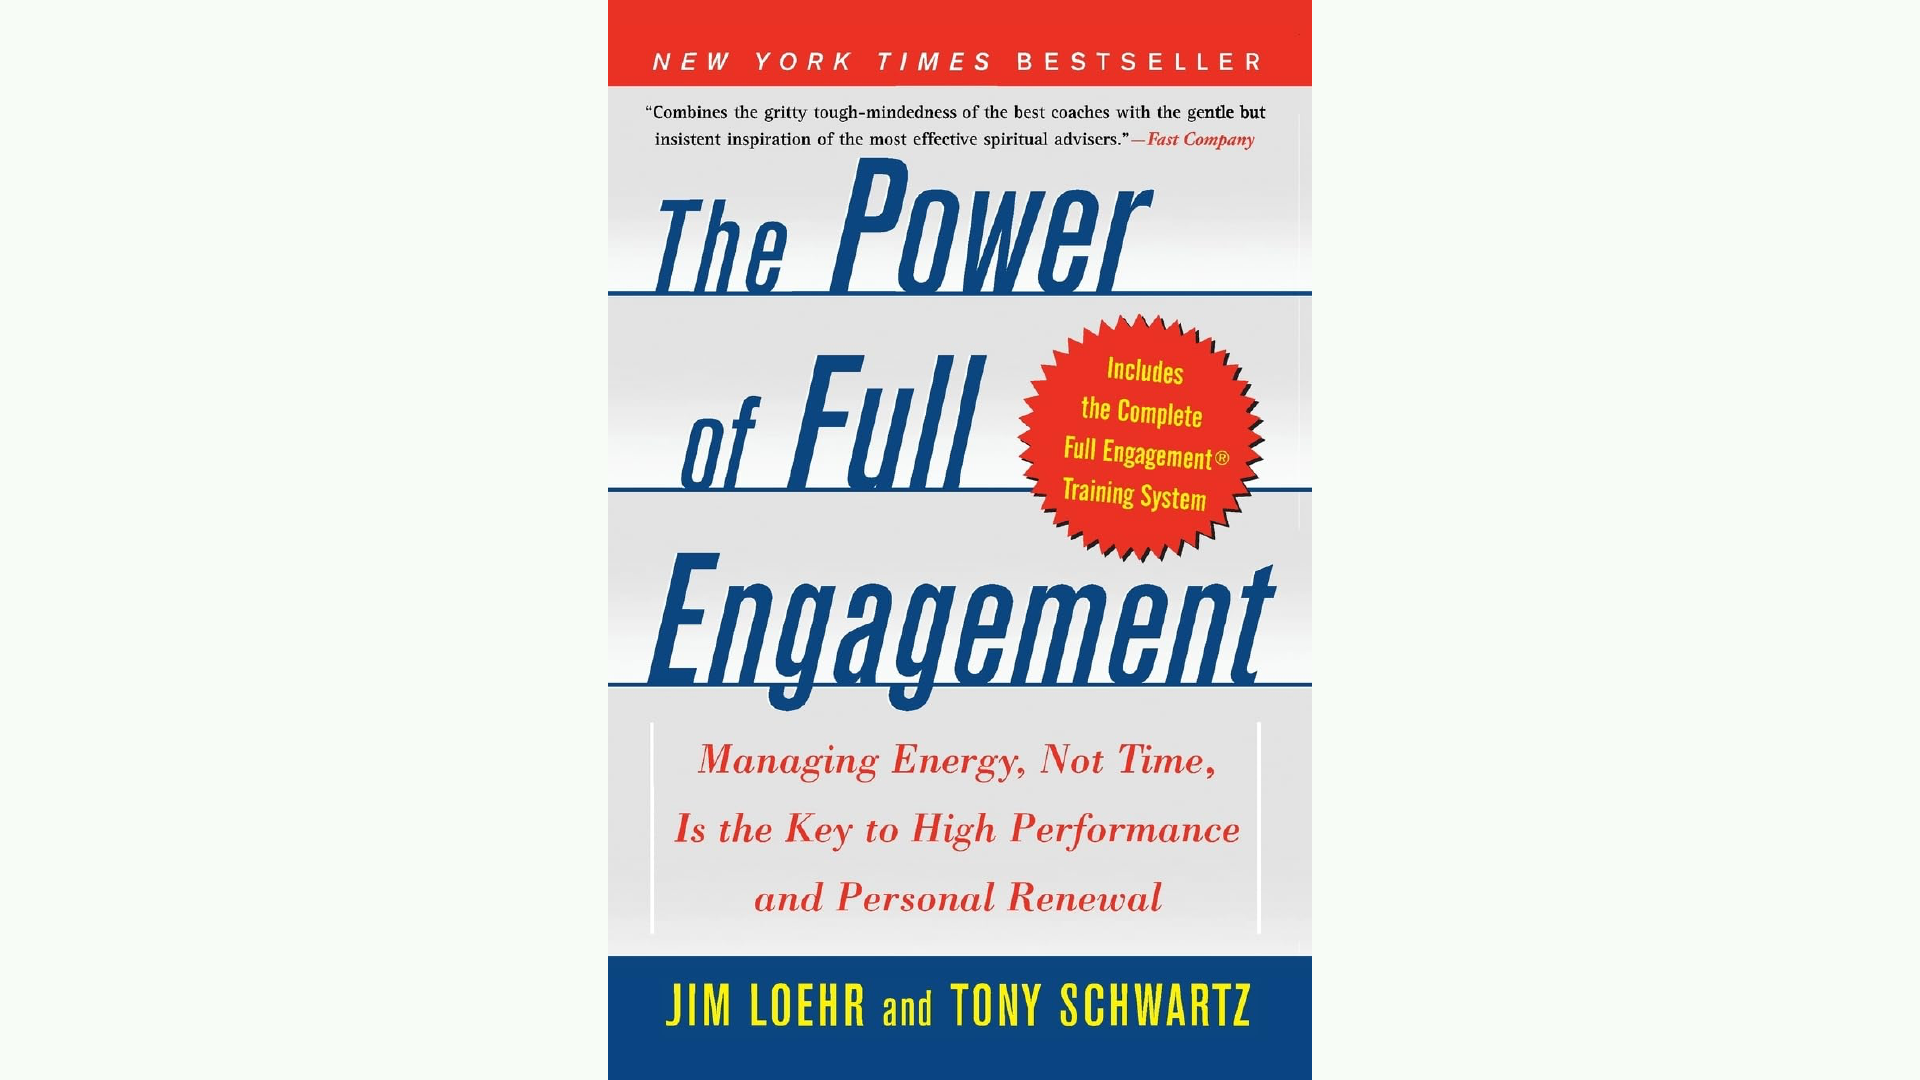 Summary: The Power of Full Engagement by Jim Loehr and Tony Schwartz